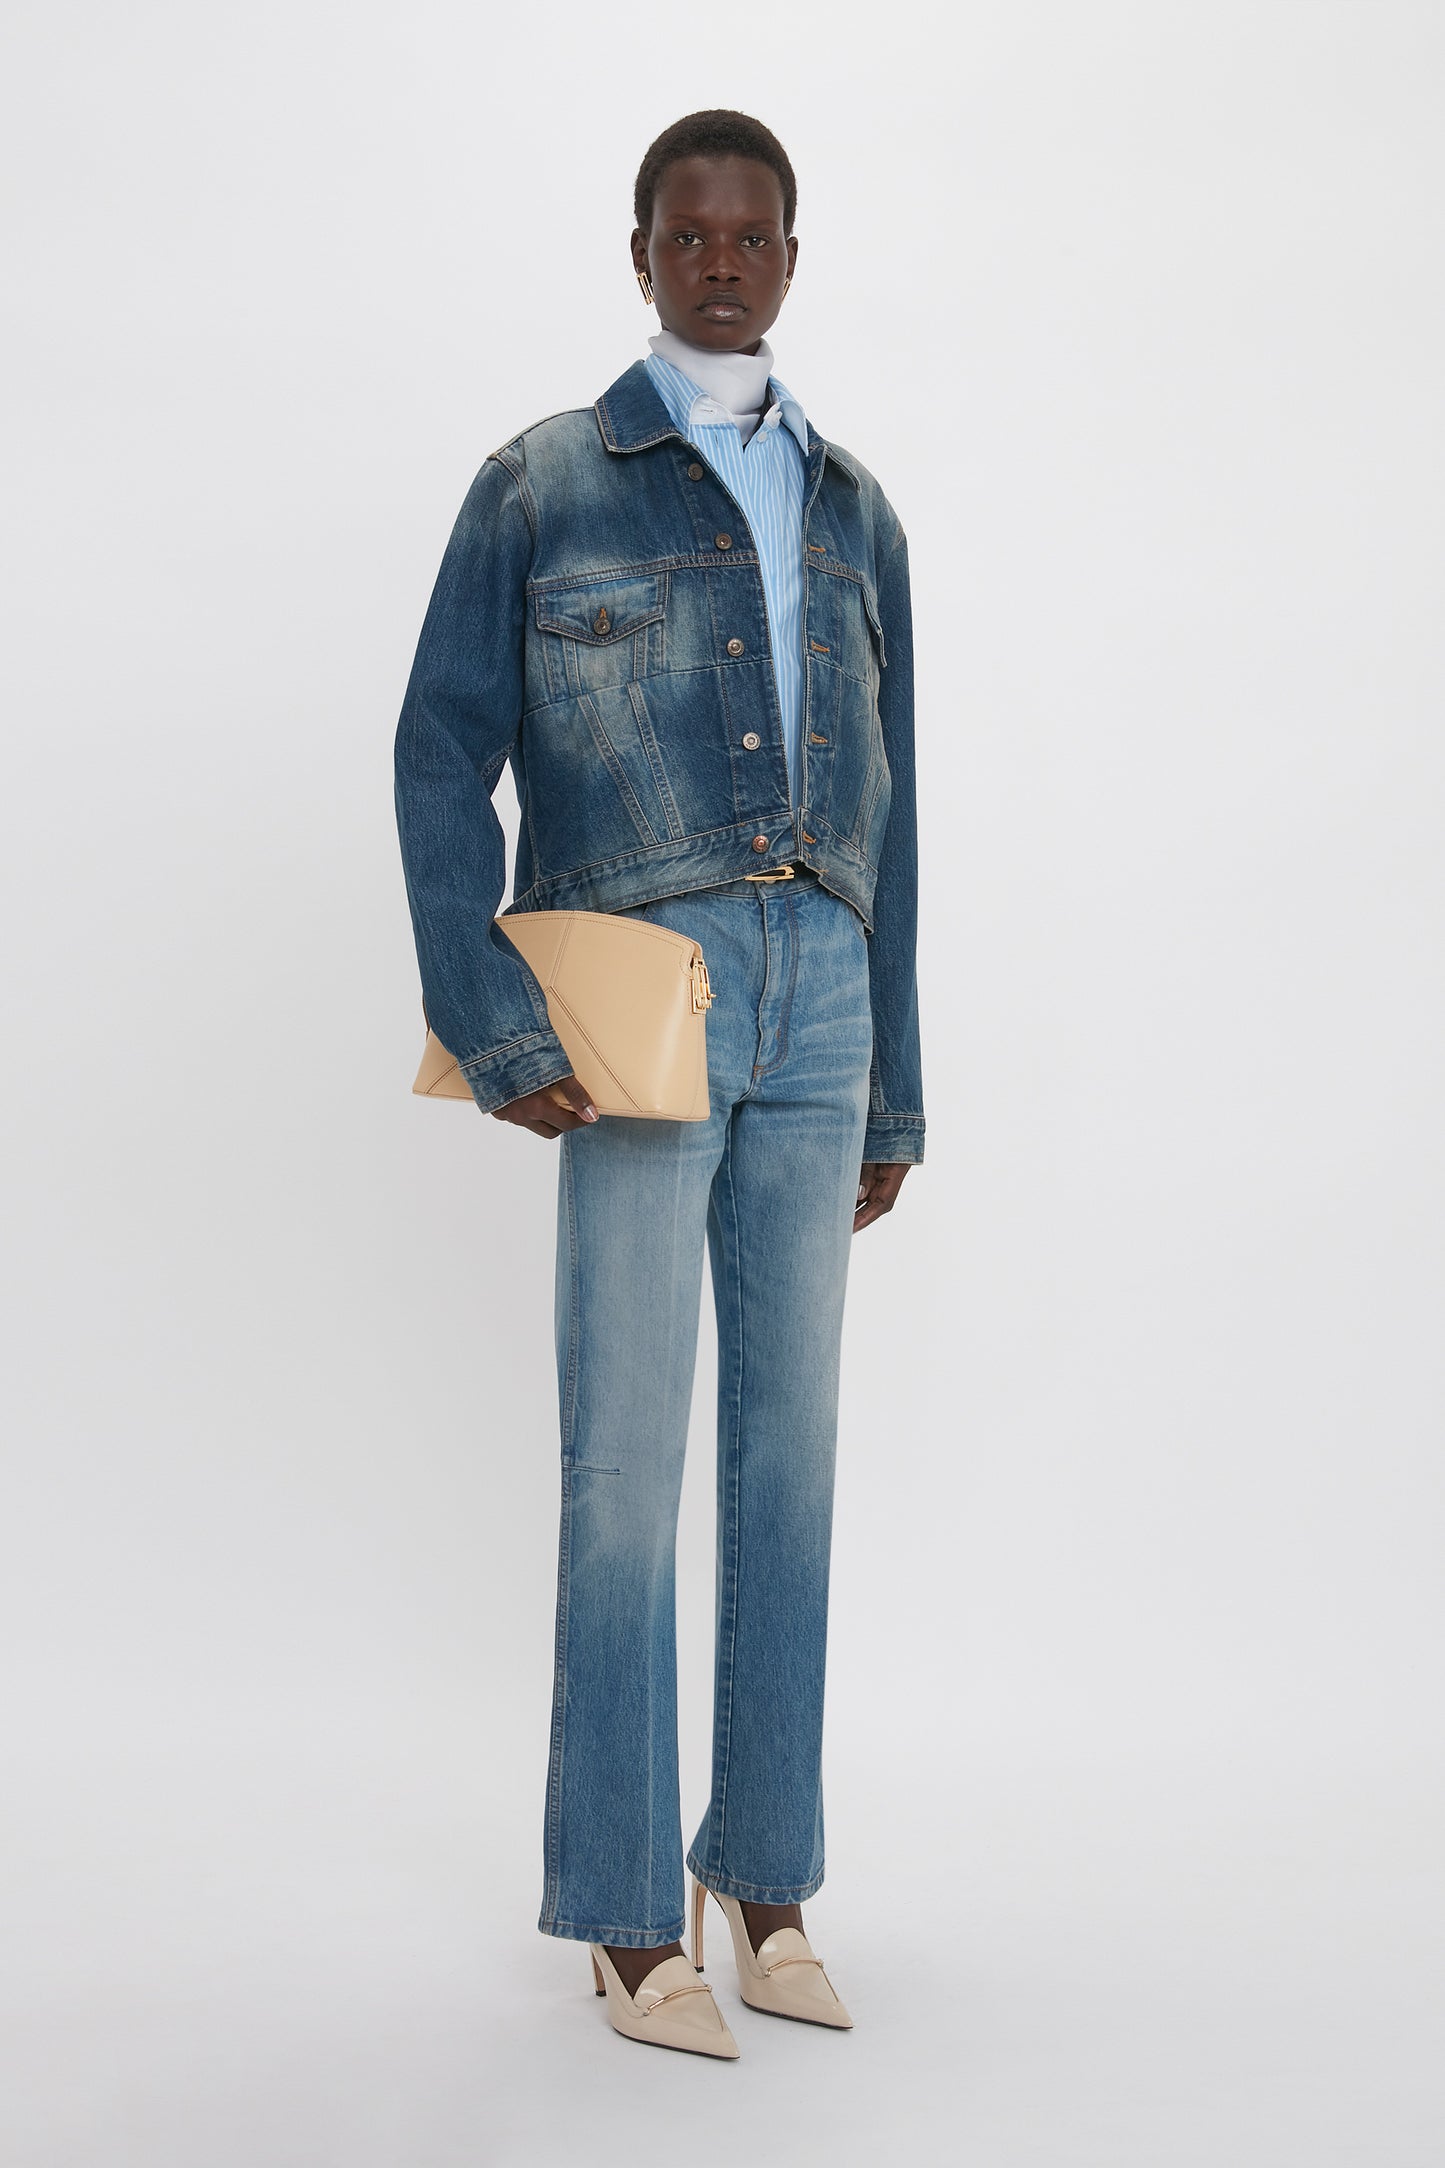 A person stands against a white background, wearing a denim jacket with a branded leather patch, Relaxed Flared Jean In Broken Vintage Wash by Victoria Beckham, a blue collared shirt, and beige shoes, holding a tan envelope clutch.